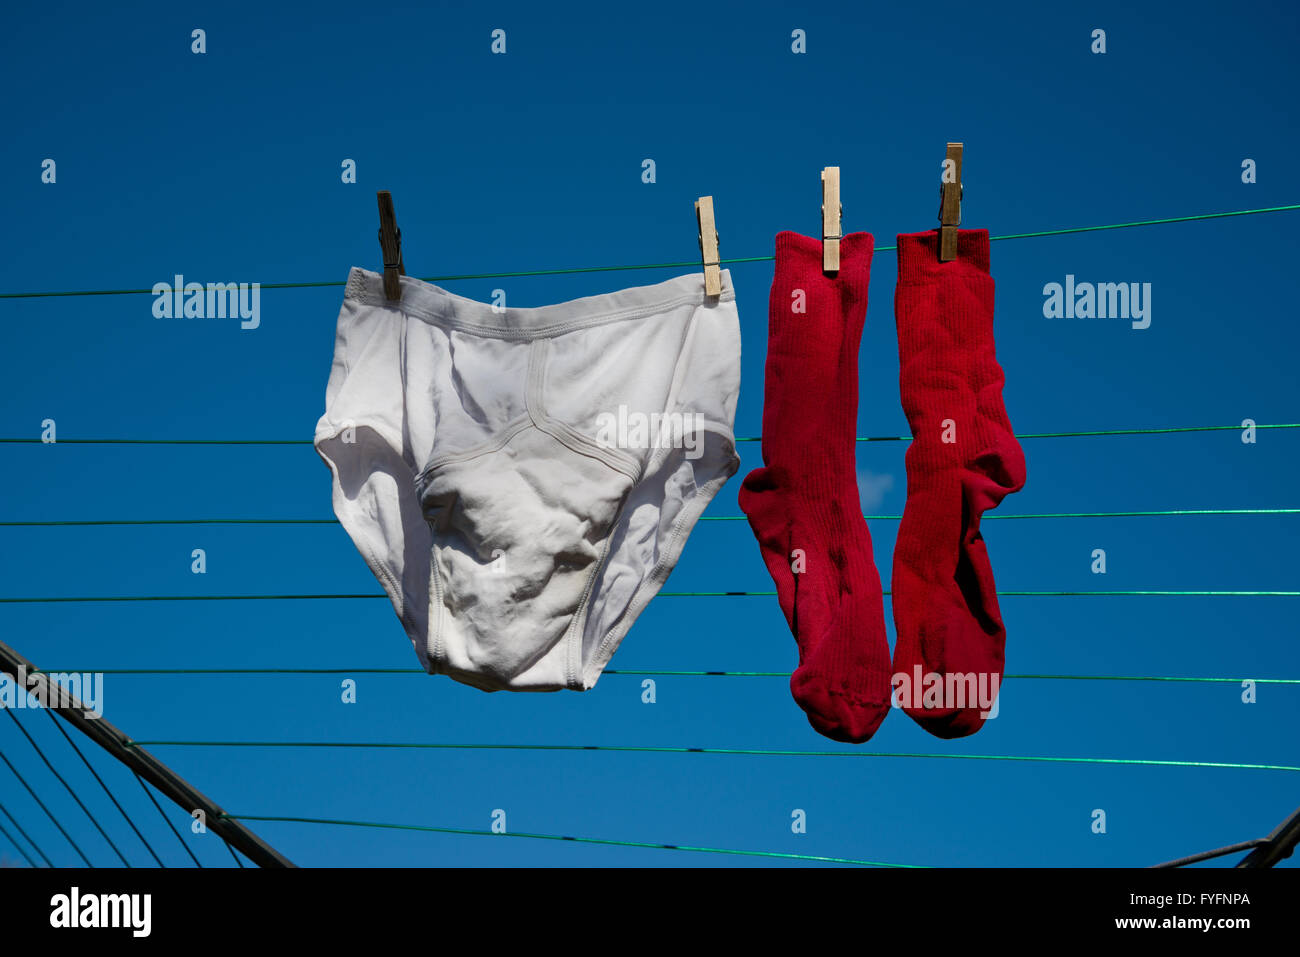 https://c8.alamy.com/comp/FYFNPA/washed-clothes-hanging-out-to-dry-on-a-washing-line-male-underwear-FYFNPA.jpg